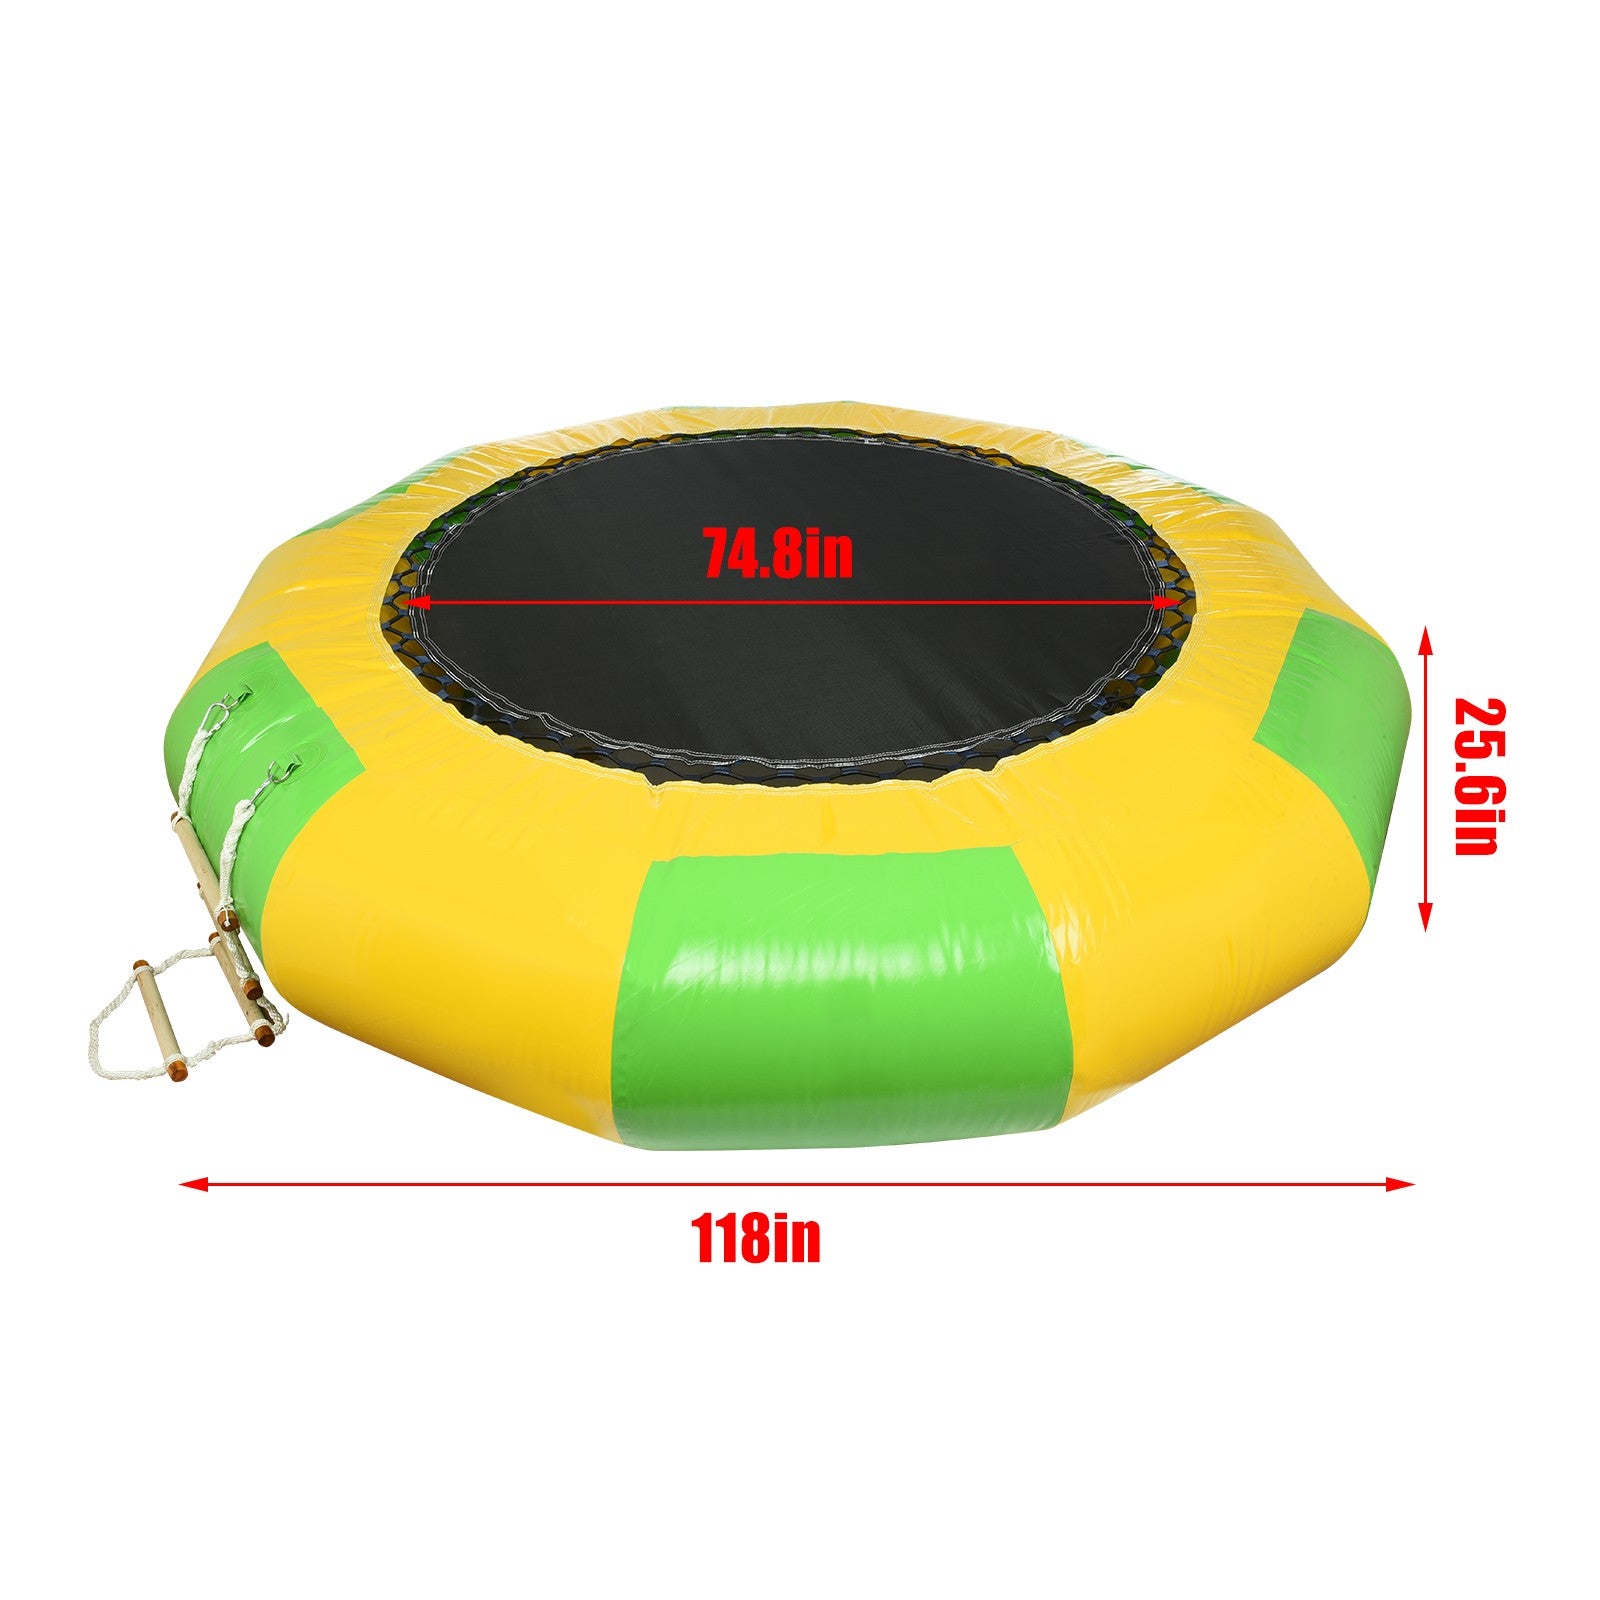 Summerella Big Bouncie, 10Ft Inflatable Water Trampoline Bounce Swim Platform For Water Sports